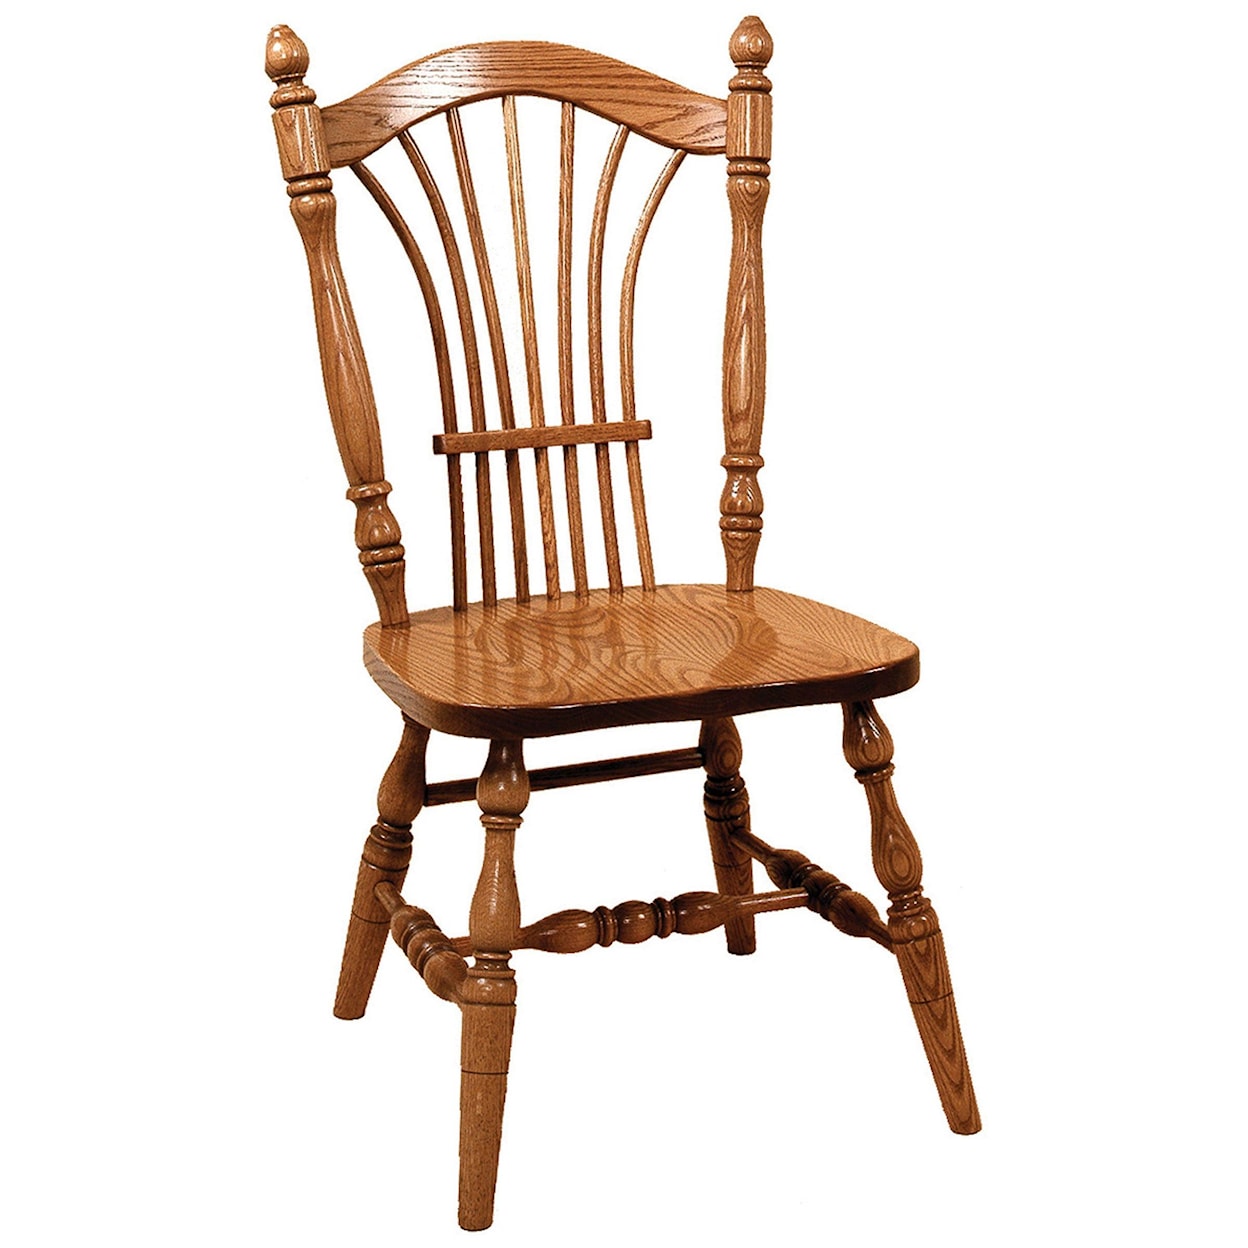 Wengerd Wood Products White-Oak Side Chair